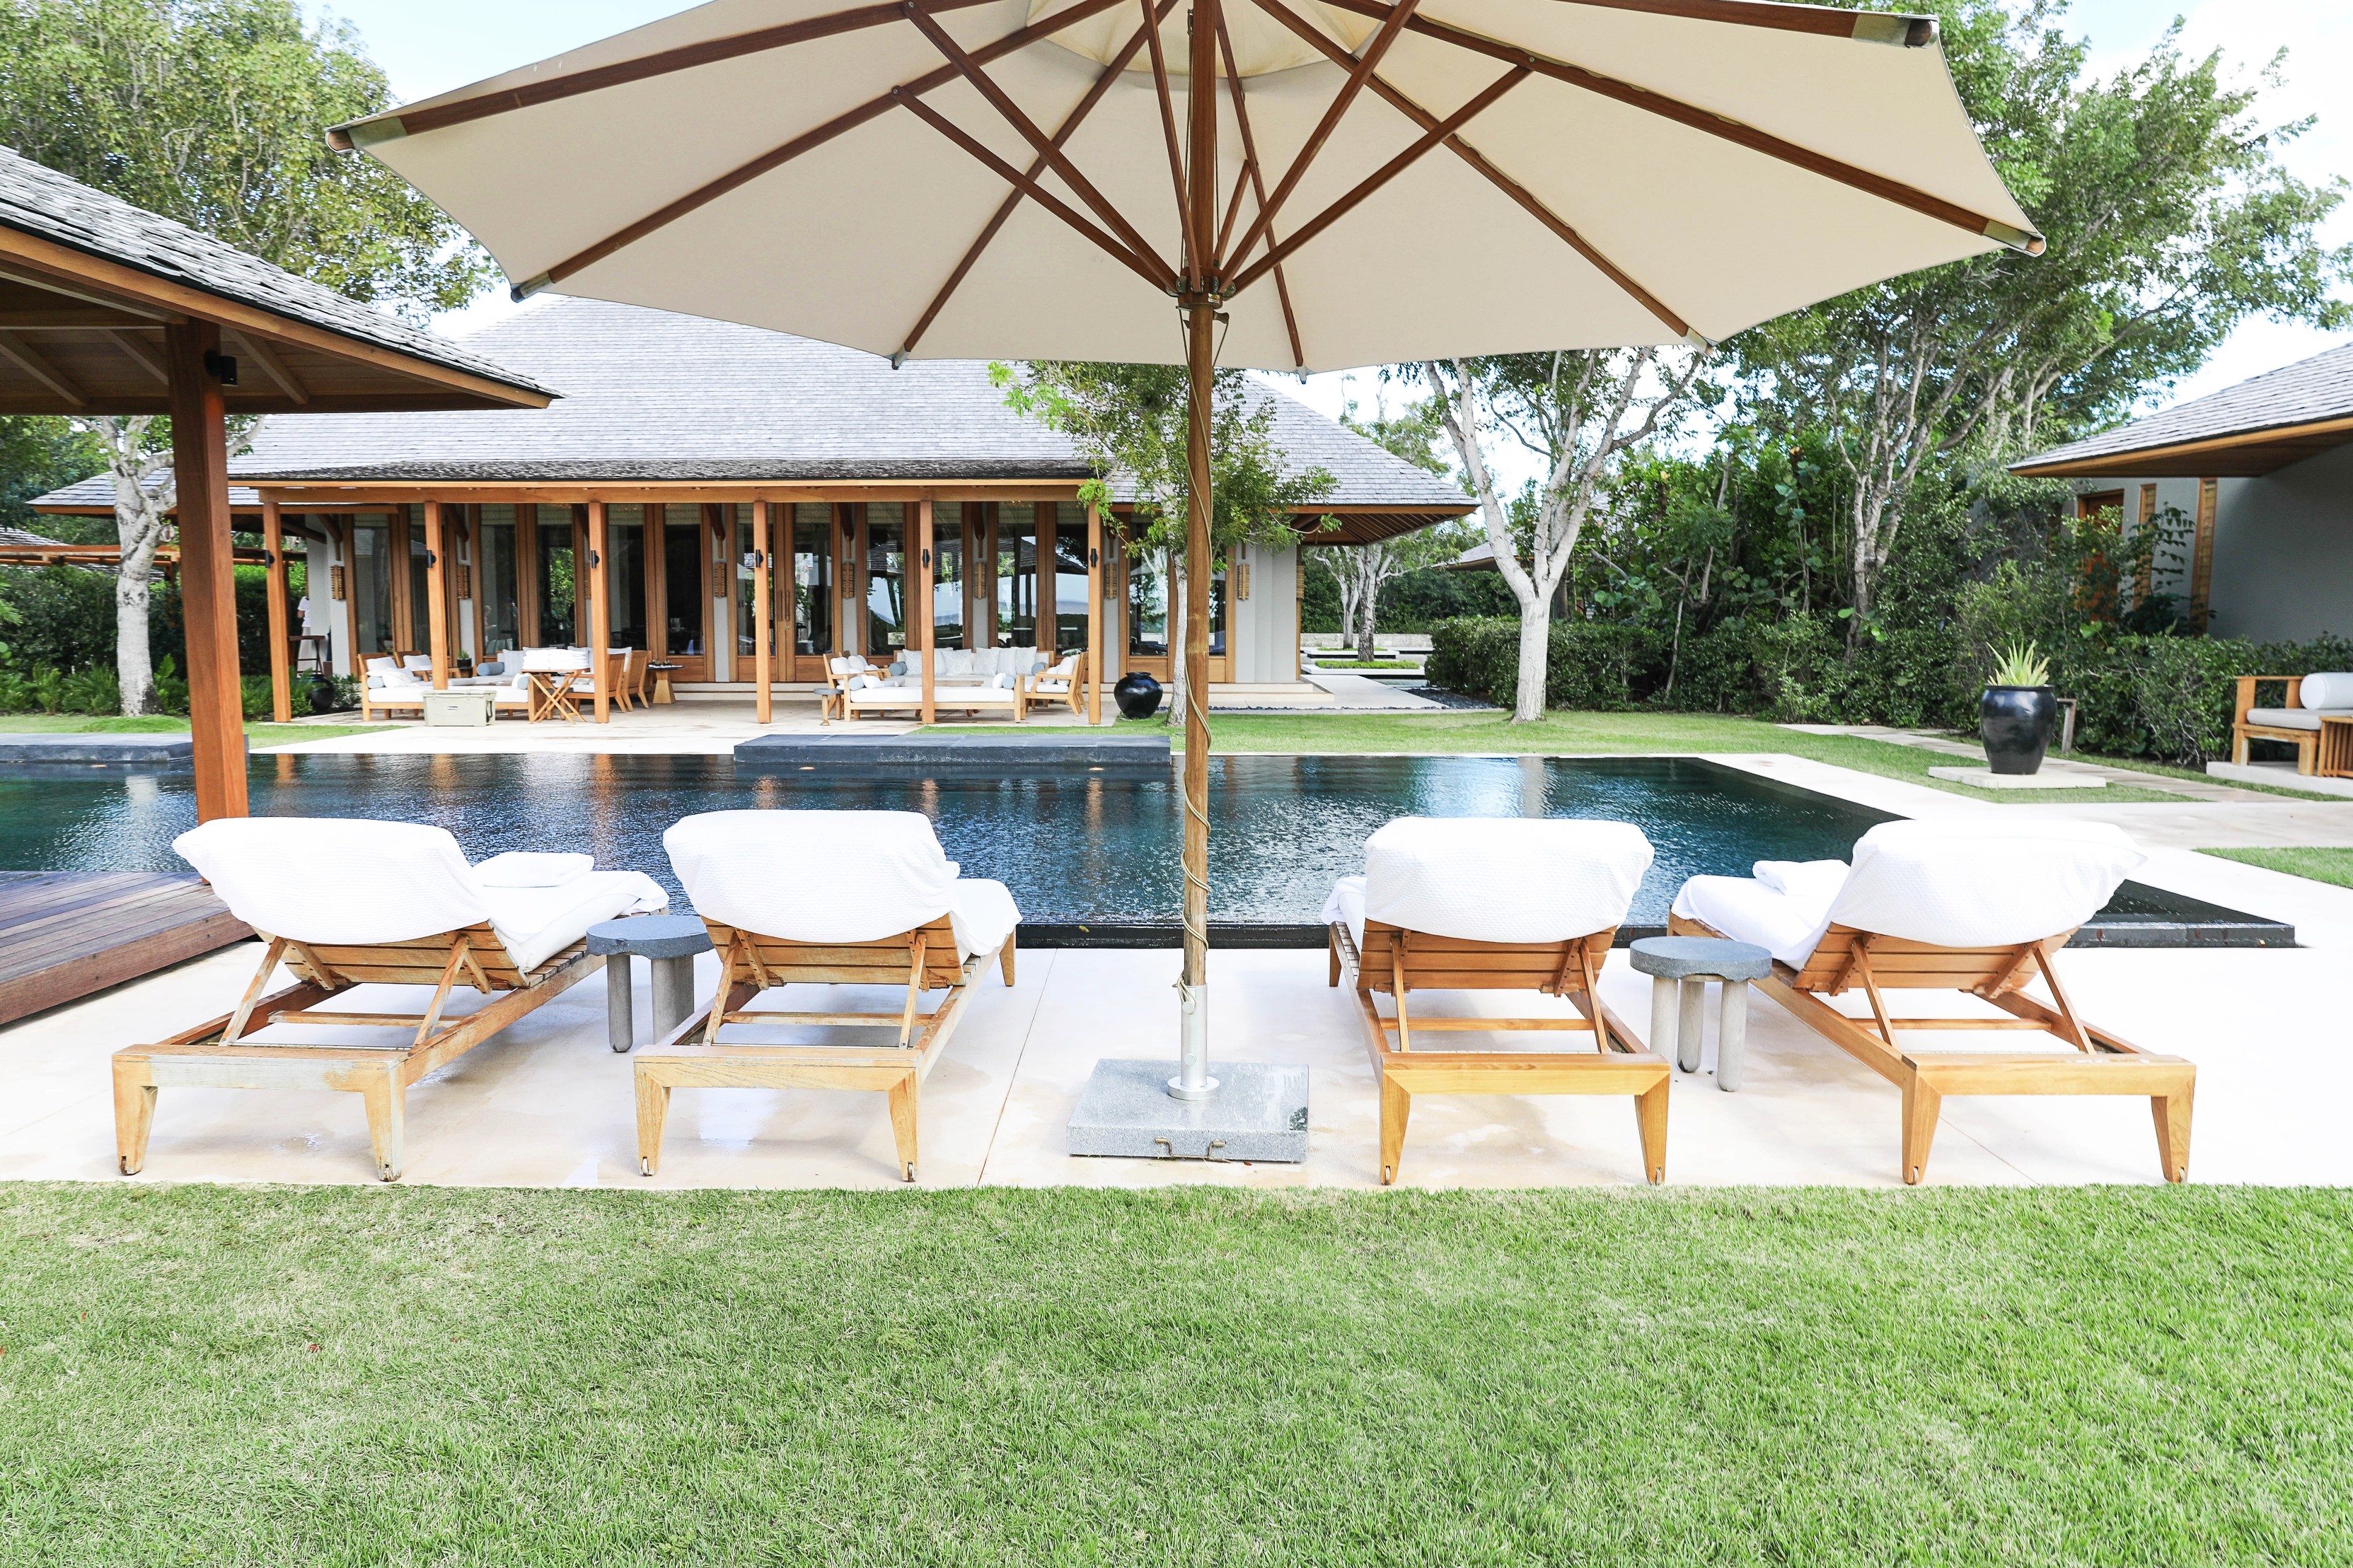 Turks and Caicos Amanyara hotel villa tour! The most beautiful six bedroom island home in the Caribbean! A really fun spring break destination at a luxury resort! Details on travel, fashion, and lifestyle blog daily dose of charm by lauren lindmark